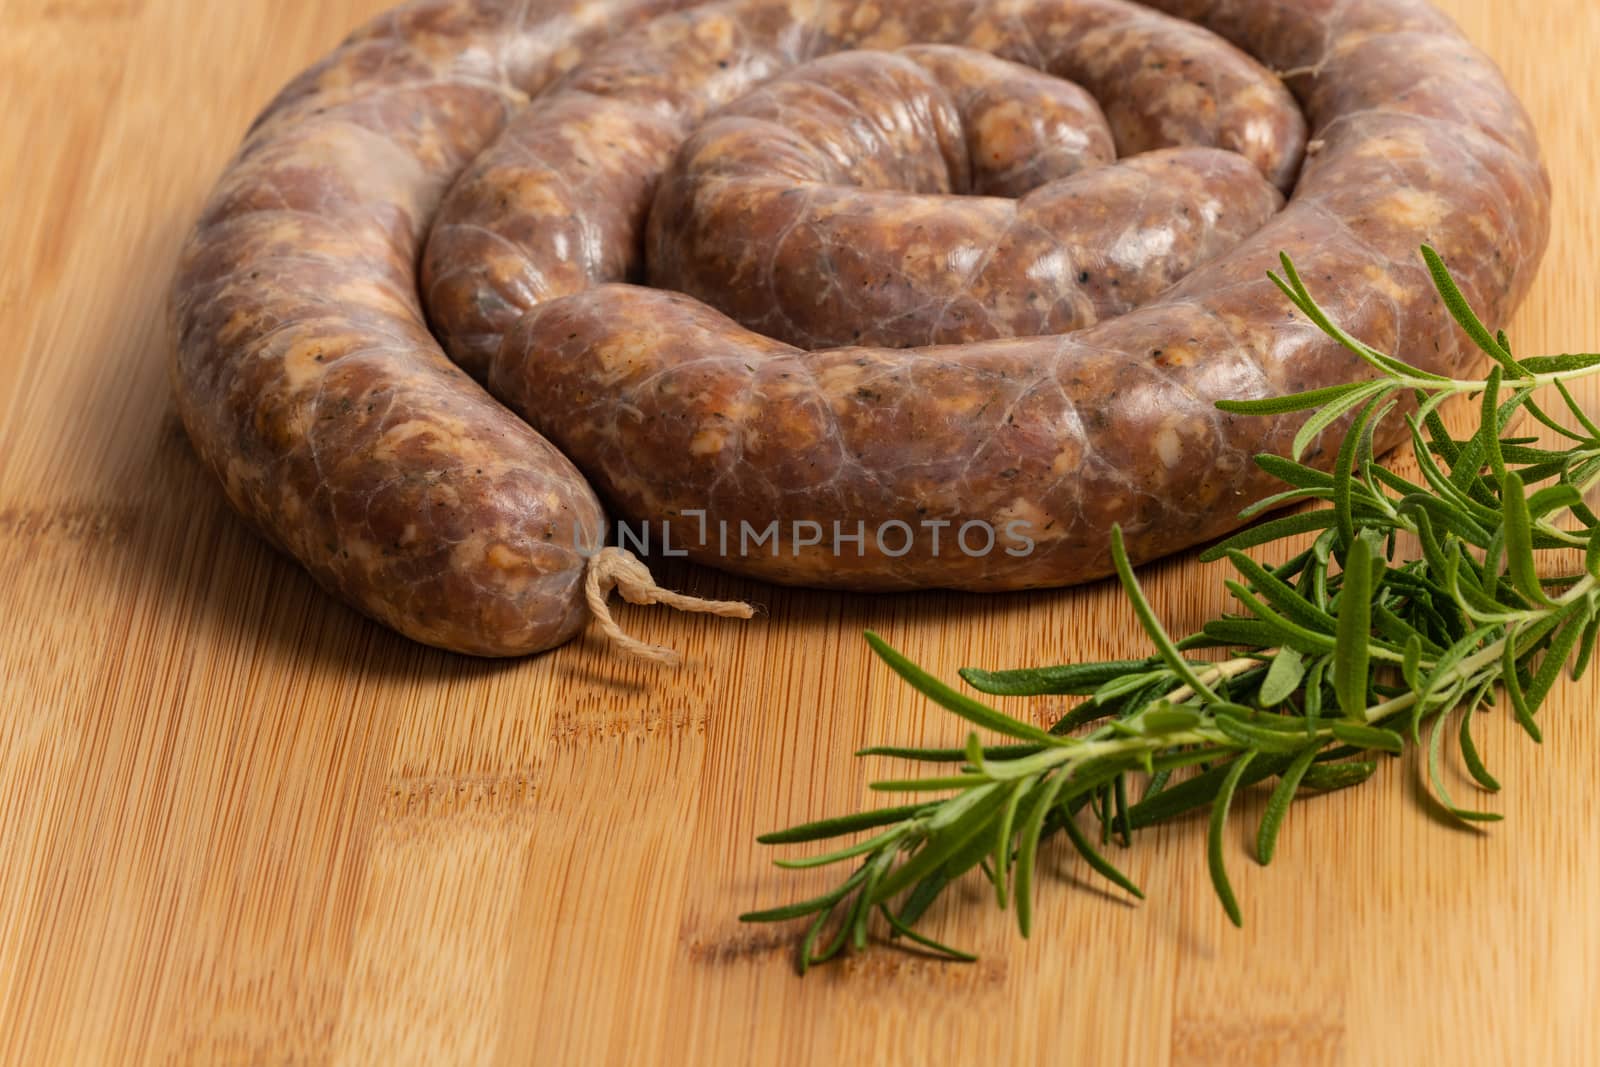 Raw Homemade Stuffed Pork Sausages by viscorp